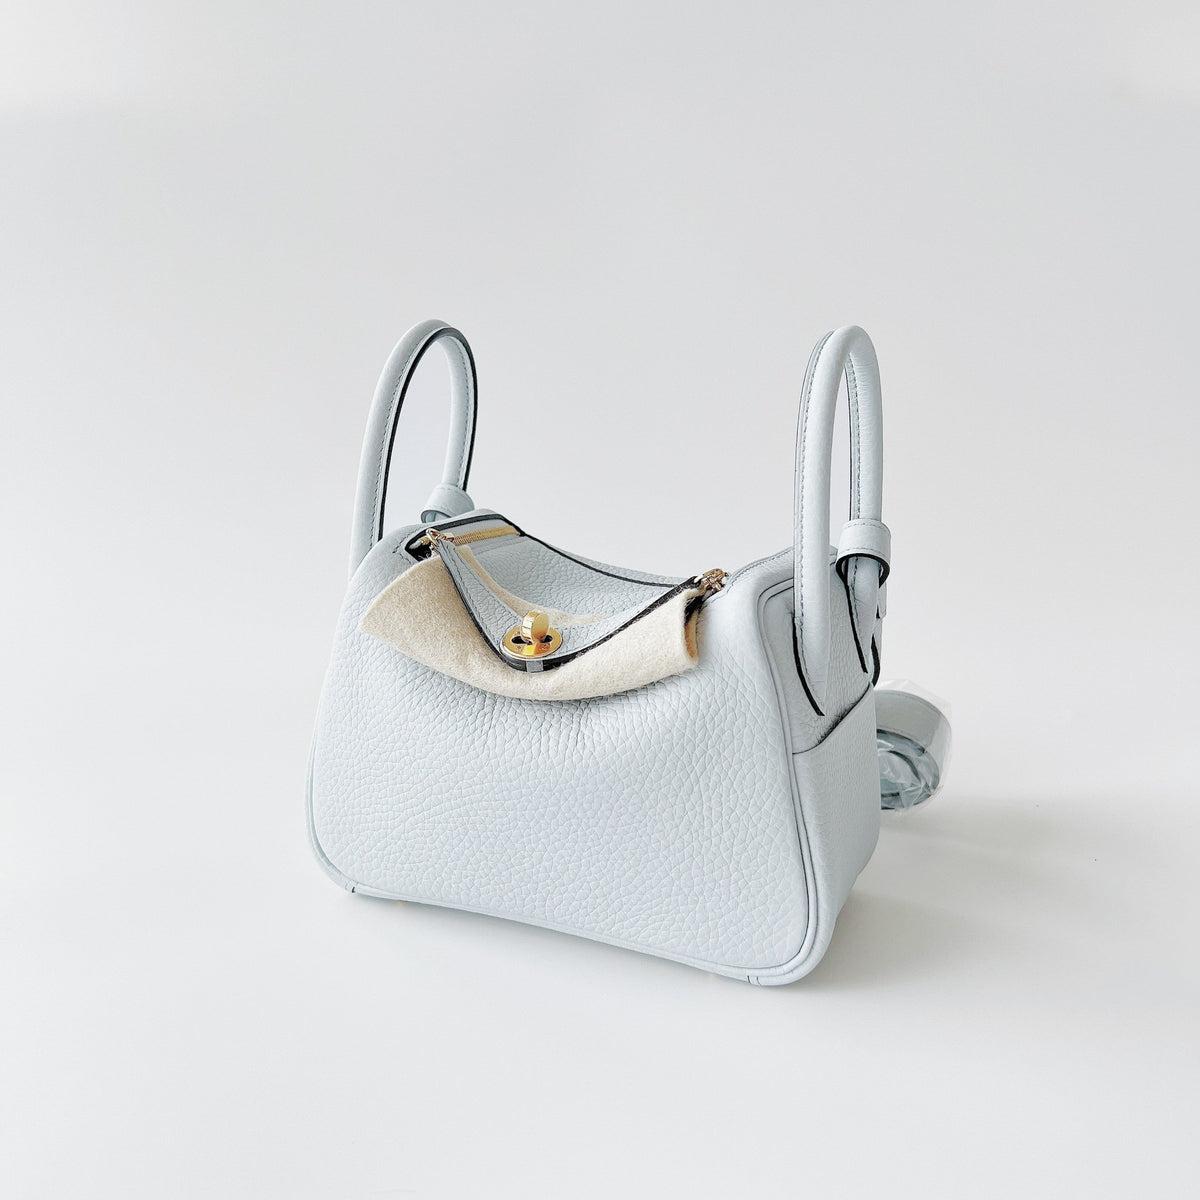 A perfect bag for any season. We have got an amazing 2022 Hermes Mini Lindy in Bleu Pale with Gold Hardware. The Mini Lindy comes in Clemence leather. 

Height: 13cm Width: 20cm Depth: 9cm Handle Drop: 5cm Strap Drop: 50cm

Condition: Brand New,